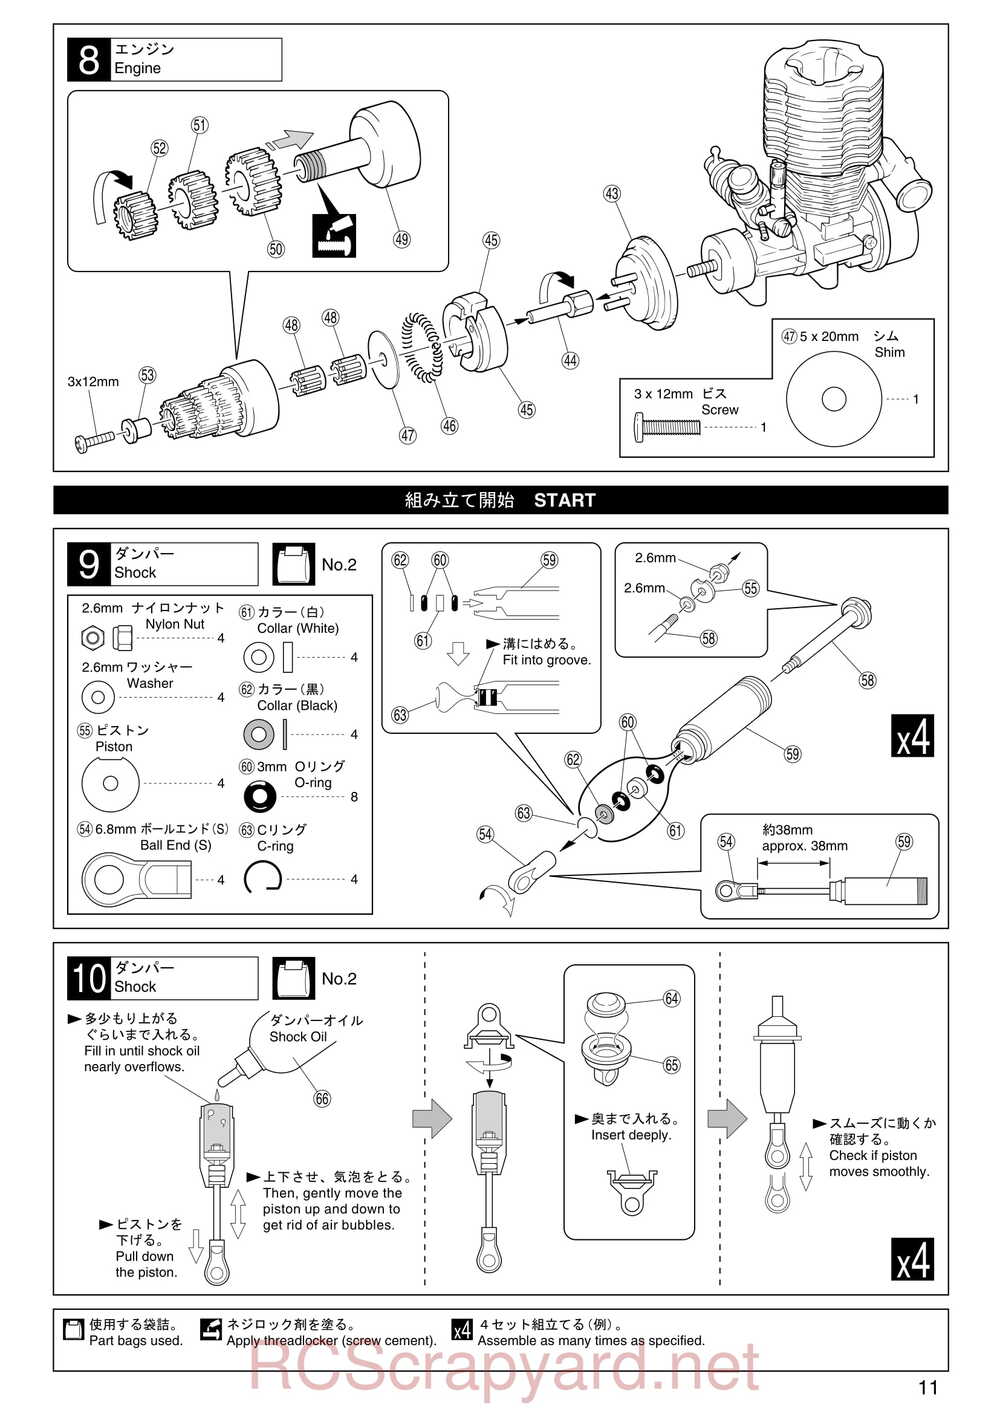 Kyosho - 31224 - Mad-Armour - Manual - Page 11